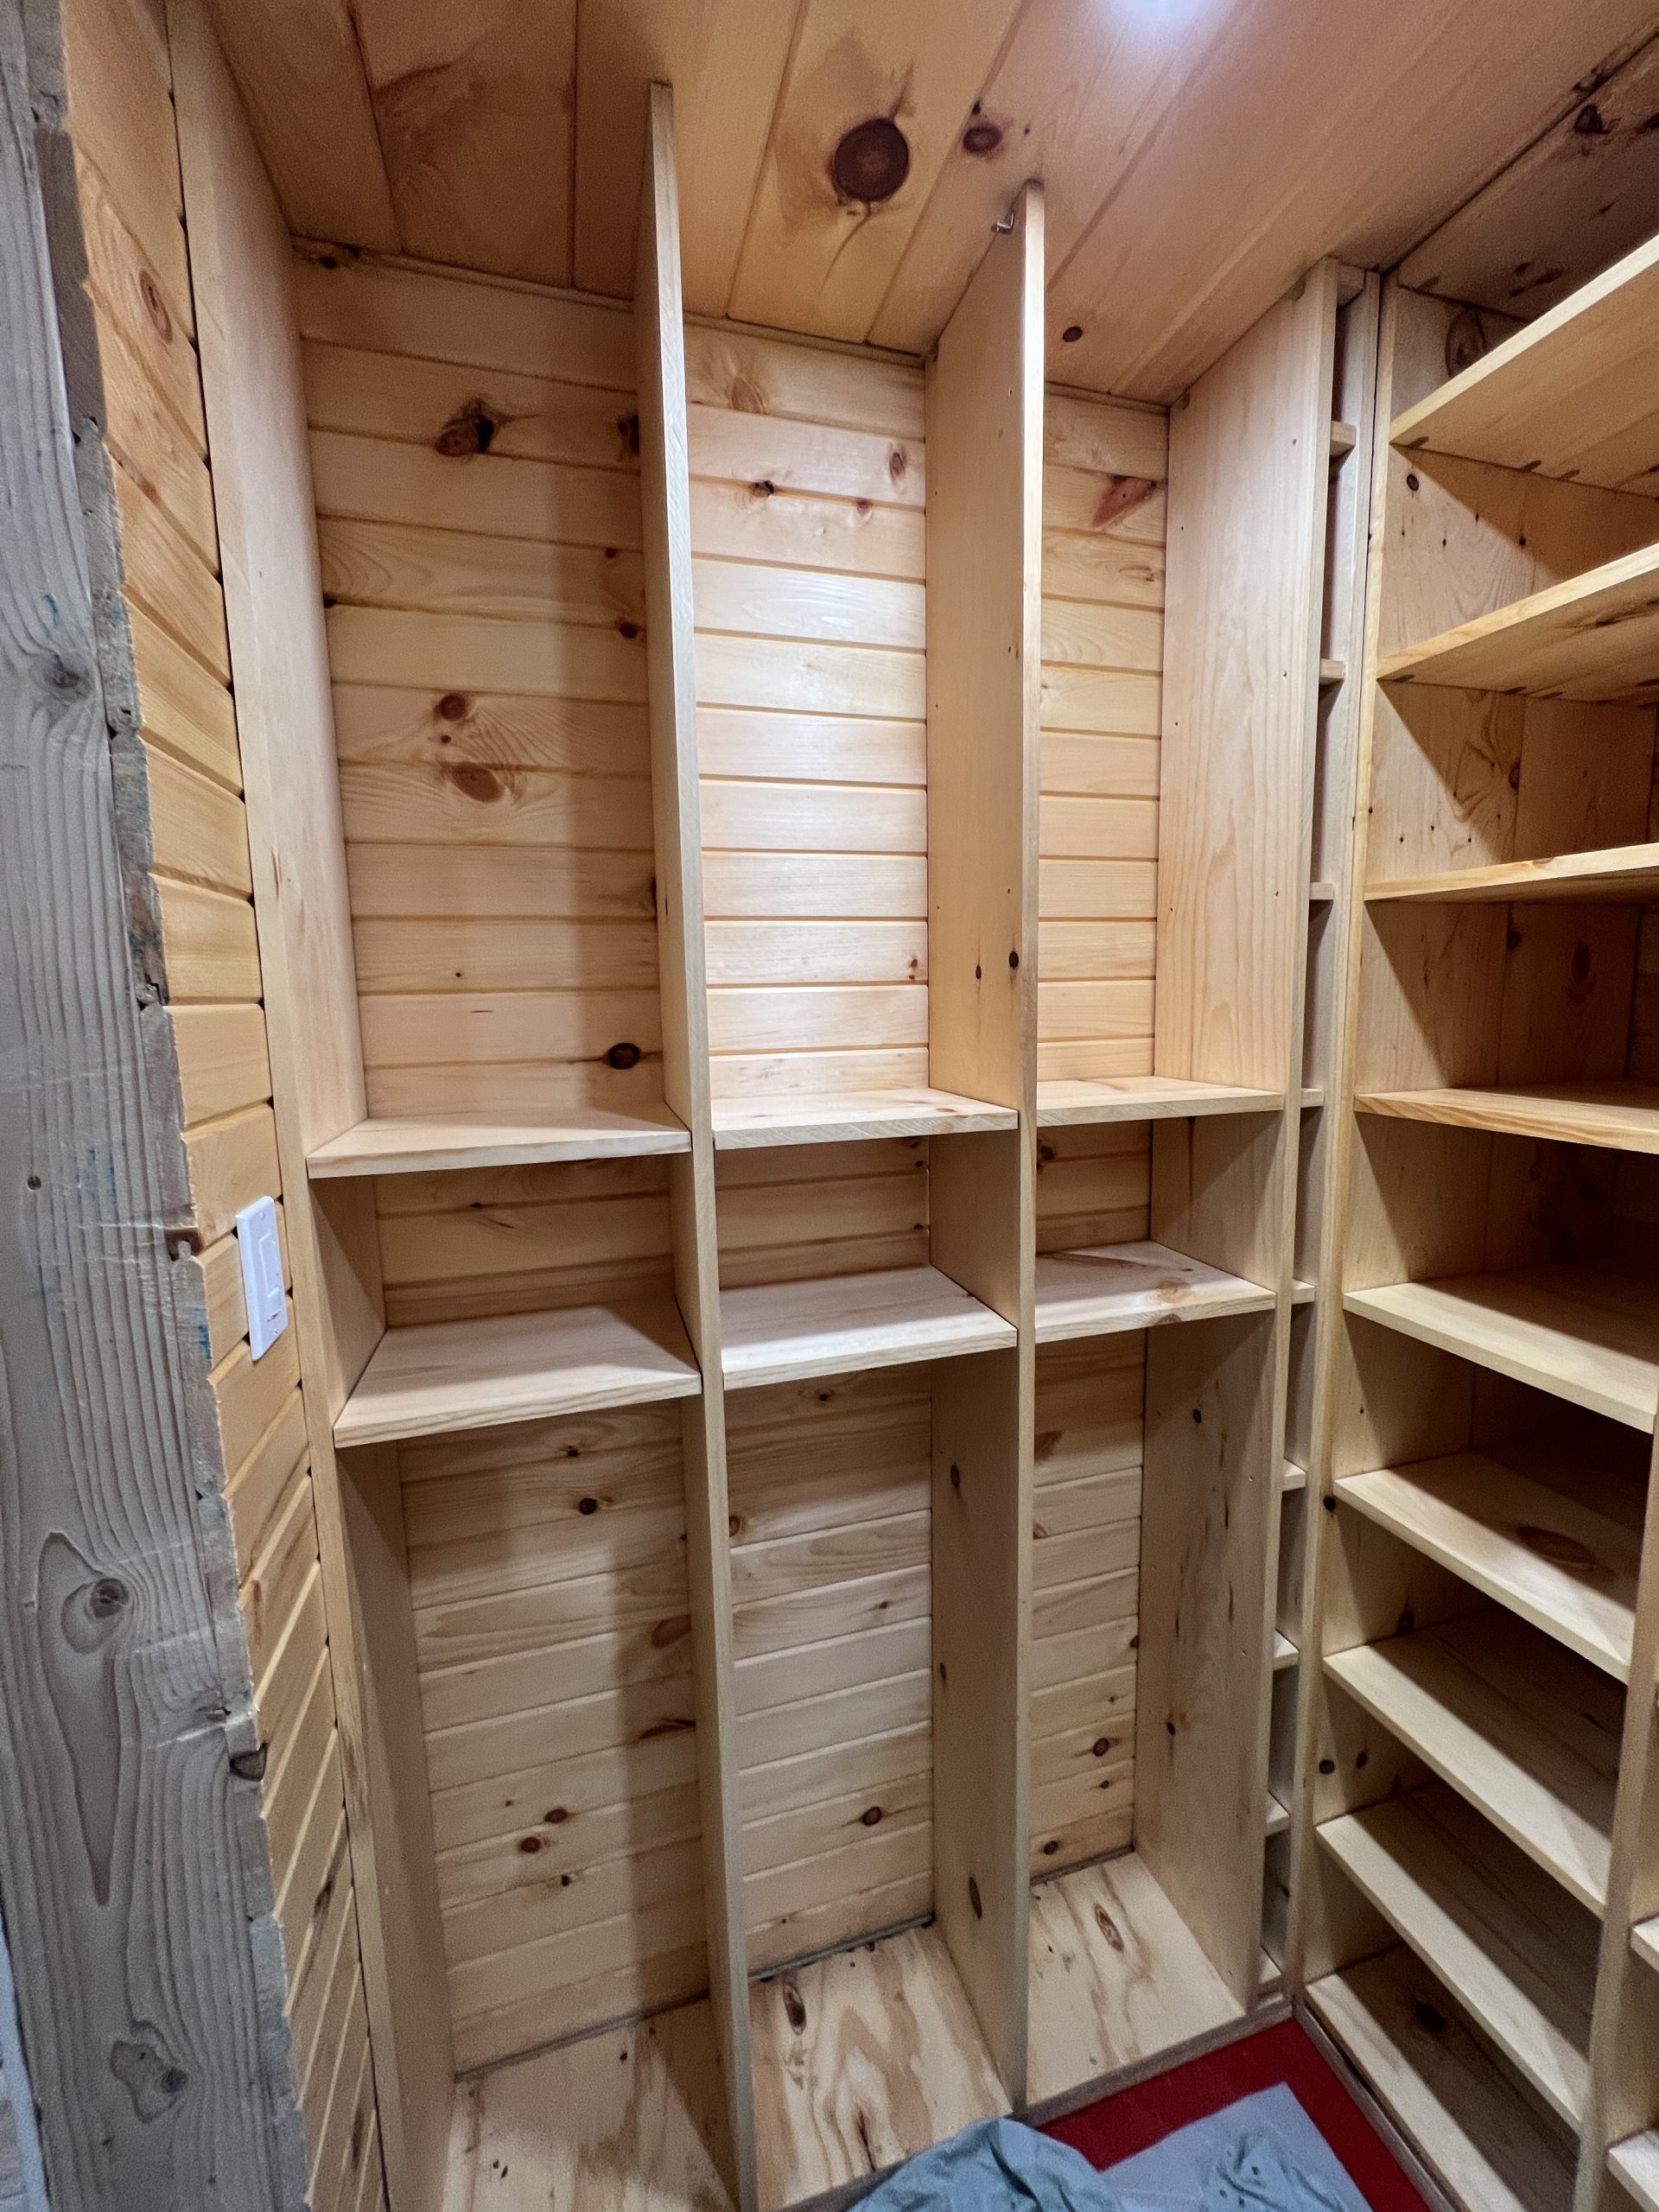 A partially assembled wall of wine bins built out of 1x10 pine boards.